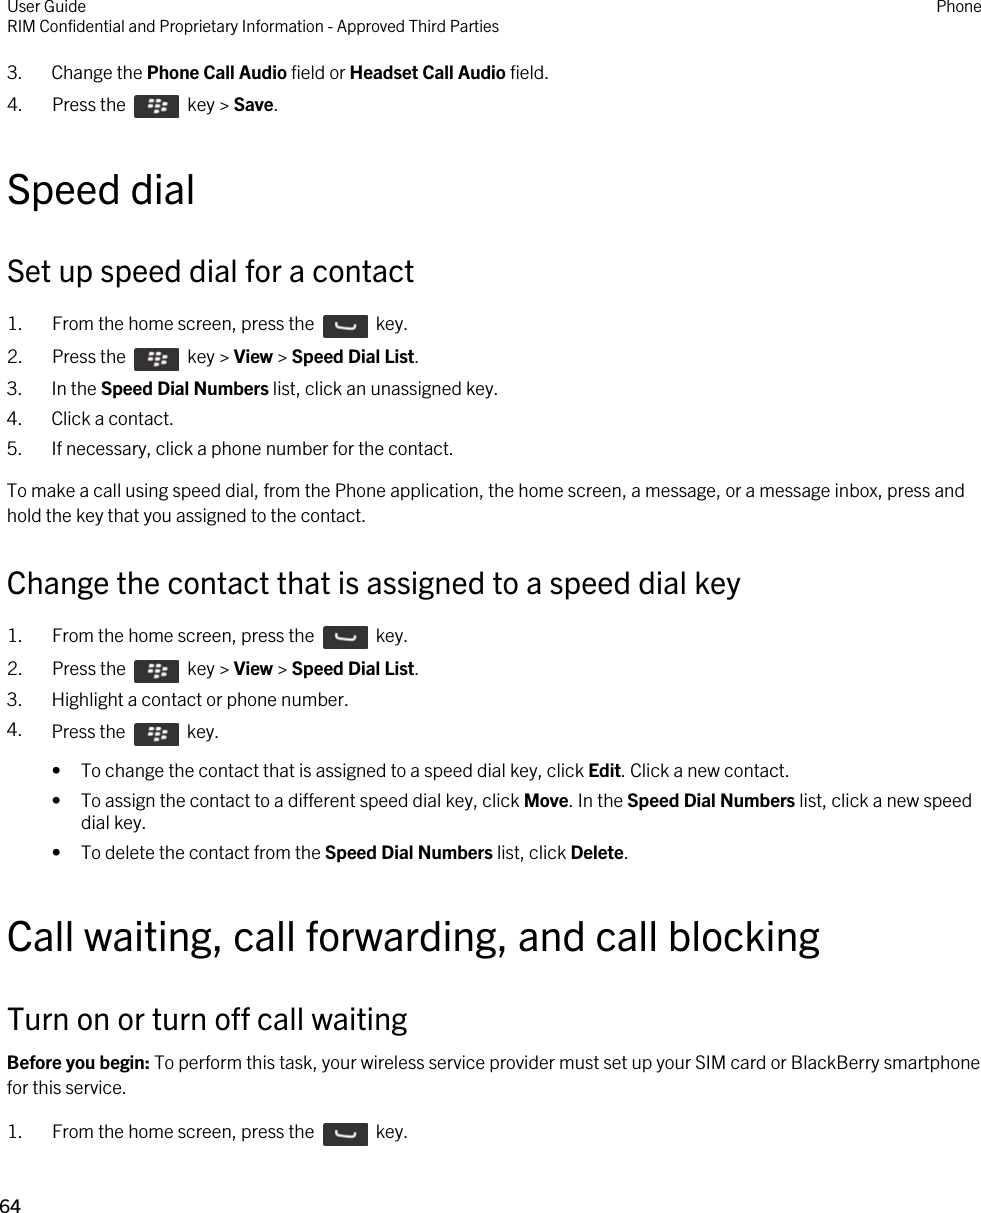 3. Change the Phone Call Audio field or Headset Call Audio field.4.  Press the    key &gt; Save. Speed dialSet up speed dial for a contact1.  From the home screen, press the    key. 2.  Press the    key &gt; View &gt; Speed Dial List. 3. In the Speed Dial Numbers list, click an unassigned key.4. Click a contact.5. If necessary, click a phone number for the contact.To make a call using speed dial, from the Phone application, the home screen, a message, or a message inbox, press and hold the key that you assigned to the contact.Change the contact that is assigned to a speed dial key1.  From the home screen, press the    key. 2.  Press the    key &gt; View &gt; Speed Dial List. 3. Highlight a contact or phone number.4. Press the    key. • To change the contact that is assigned to a speed dial key, click Edit. Click a new contact.• To assign the contact to a different speed dial key, click Move. In the Speed Dial Numbers list, click a new speed dial key.• To delete the contact from the Speed Dial Numbers list, click Delete.Call waiting, call forwarding, and call blockingTurn on or turn off call waitingBefore you begin: To perform this task, your wireless service provider must set up your SIM card or BlackBerry smartphone for this service.1.  From the home screen, press the    key. User GuideRIM Confidential and Proprietary Information - Approved Third Parties Phone64 